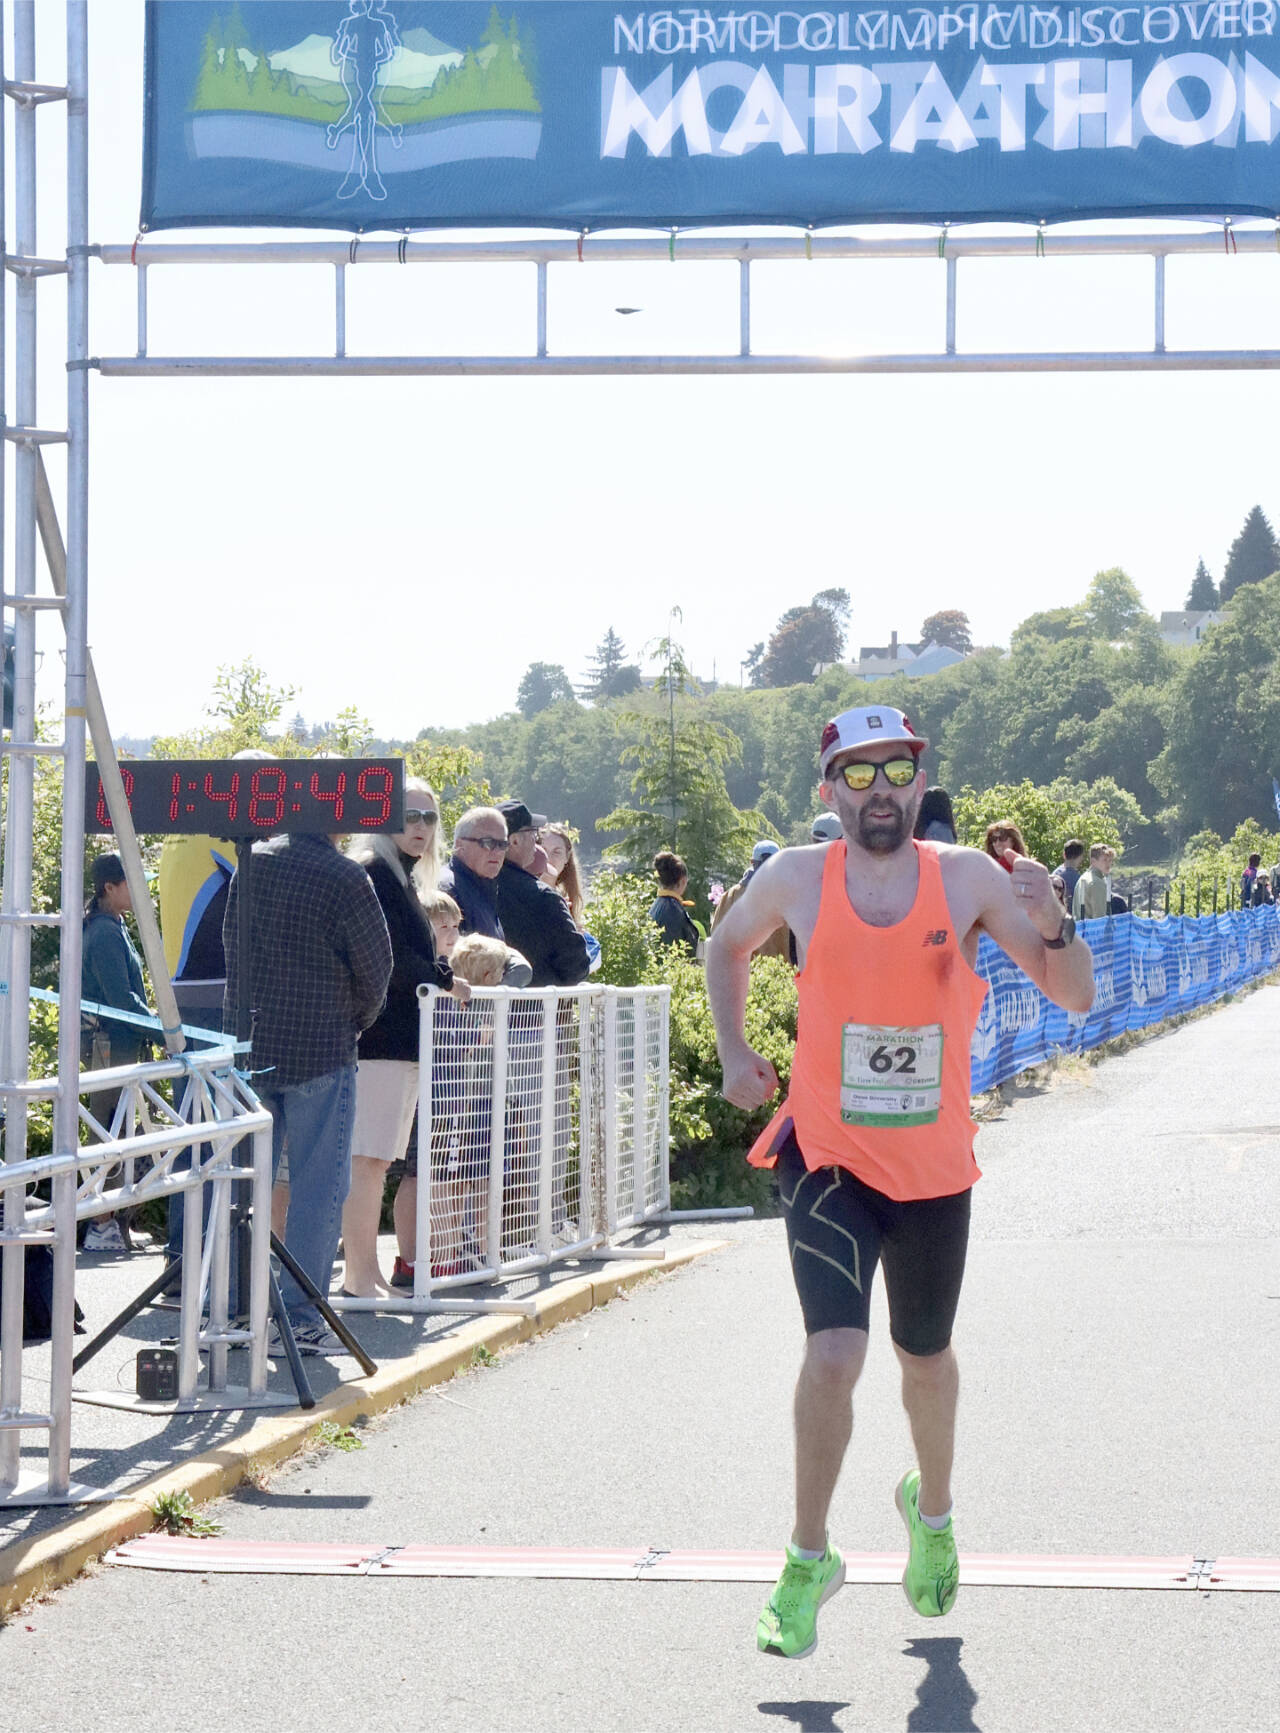 Derek Binnersley of Victoria, B.C., crosses the finish line as the winner of the North Olympic Discovery Marathon. Binnersley, running his first marathon, won in a time of 2 hours, 48 minutes, 47.51 seconds, winning by more than 5 minutes. (Dave Logan/for Peninsula Daily News)